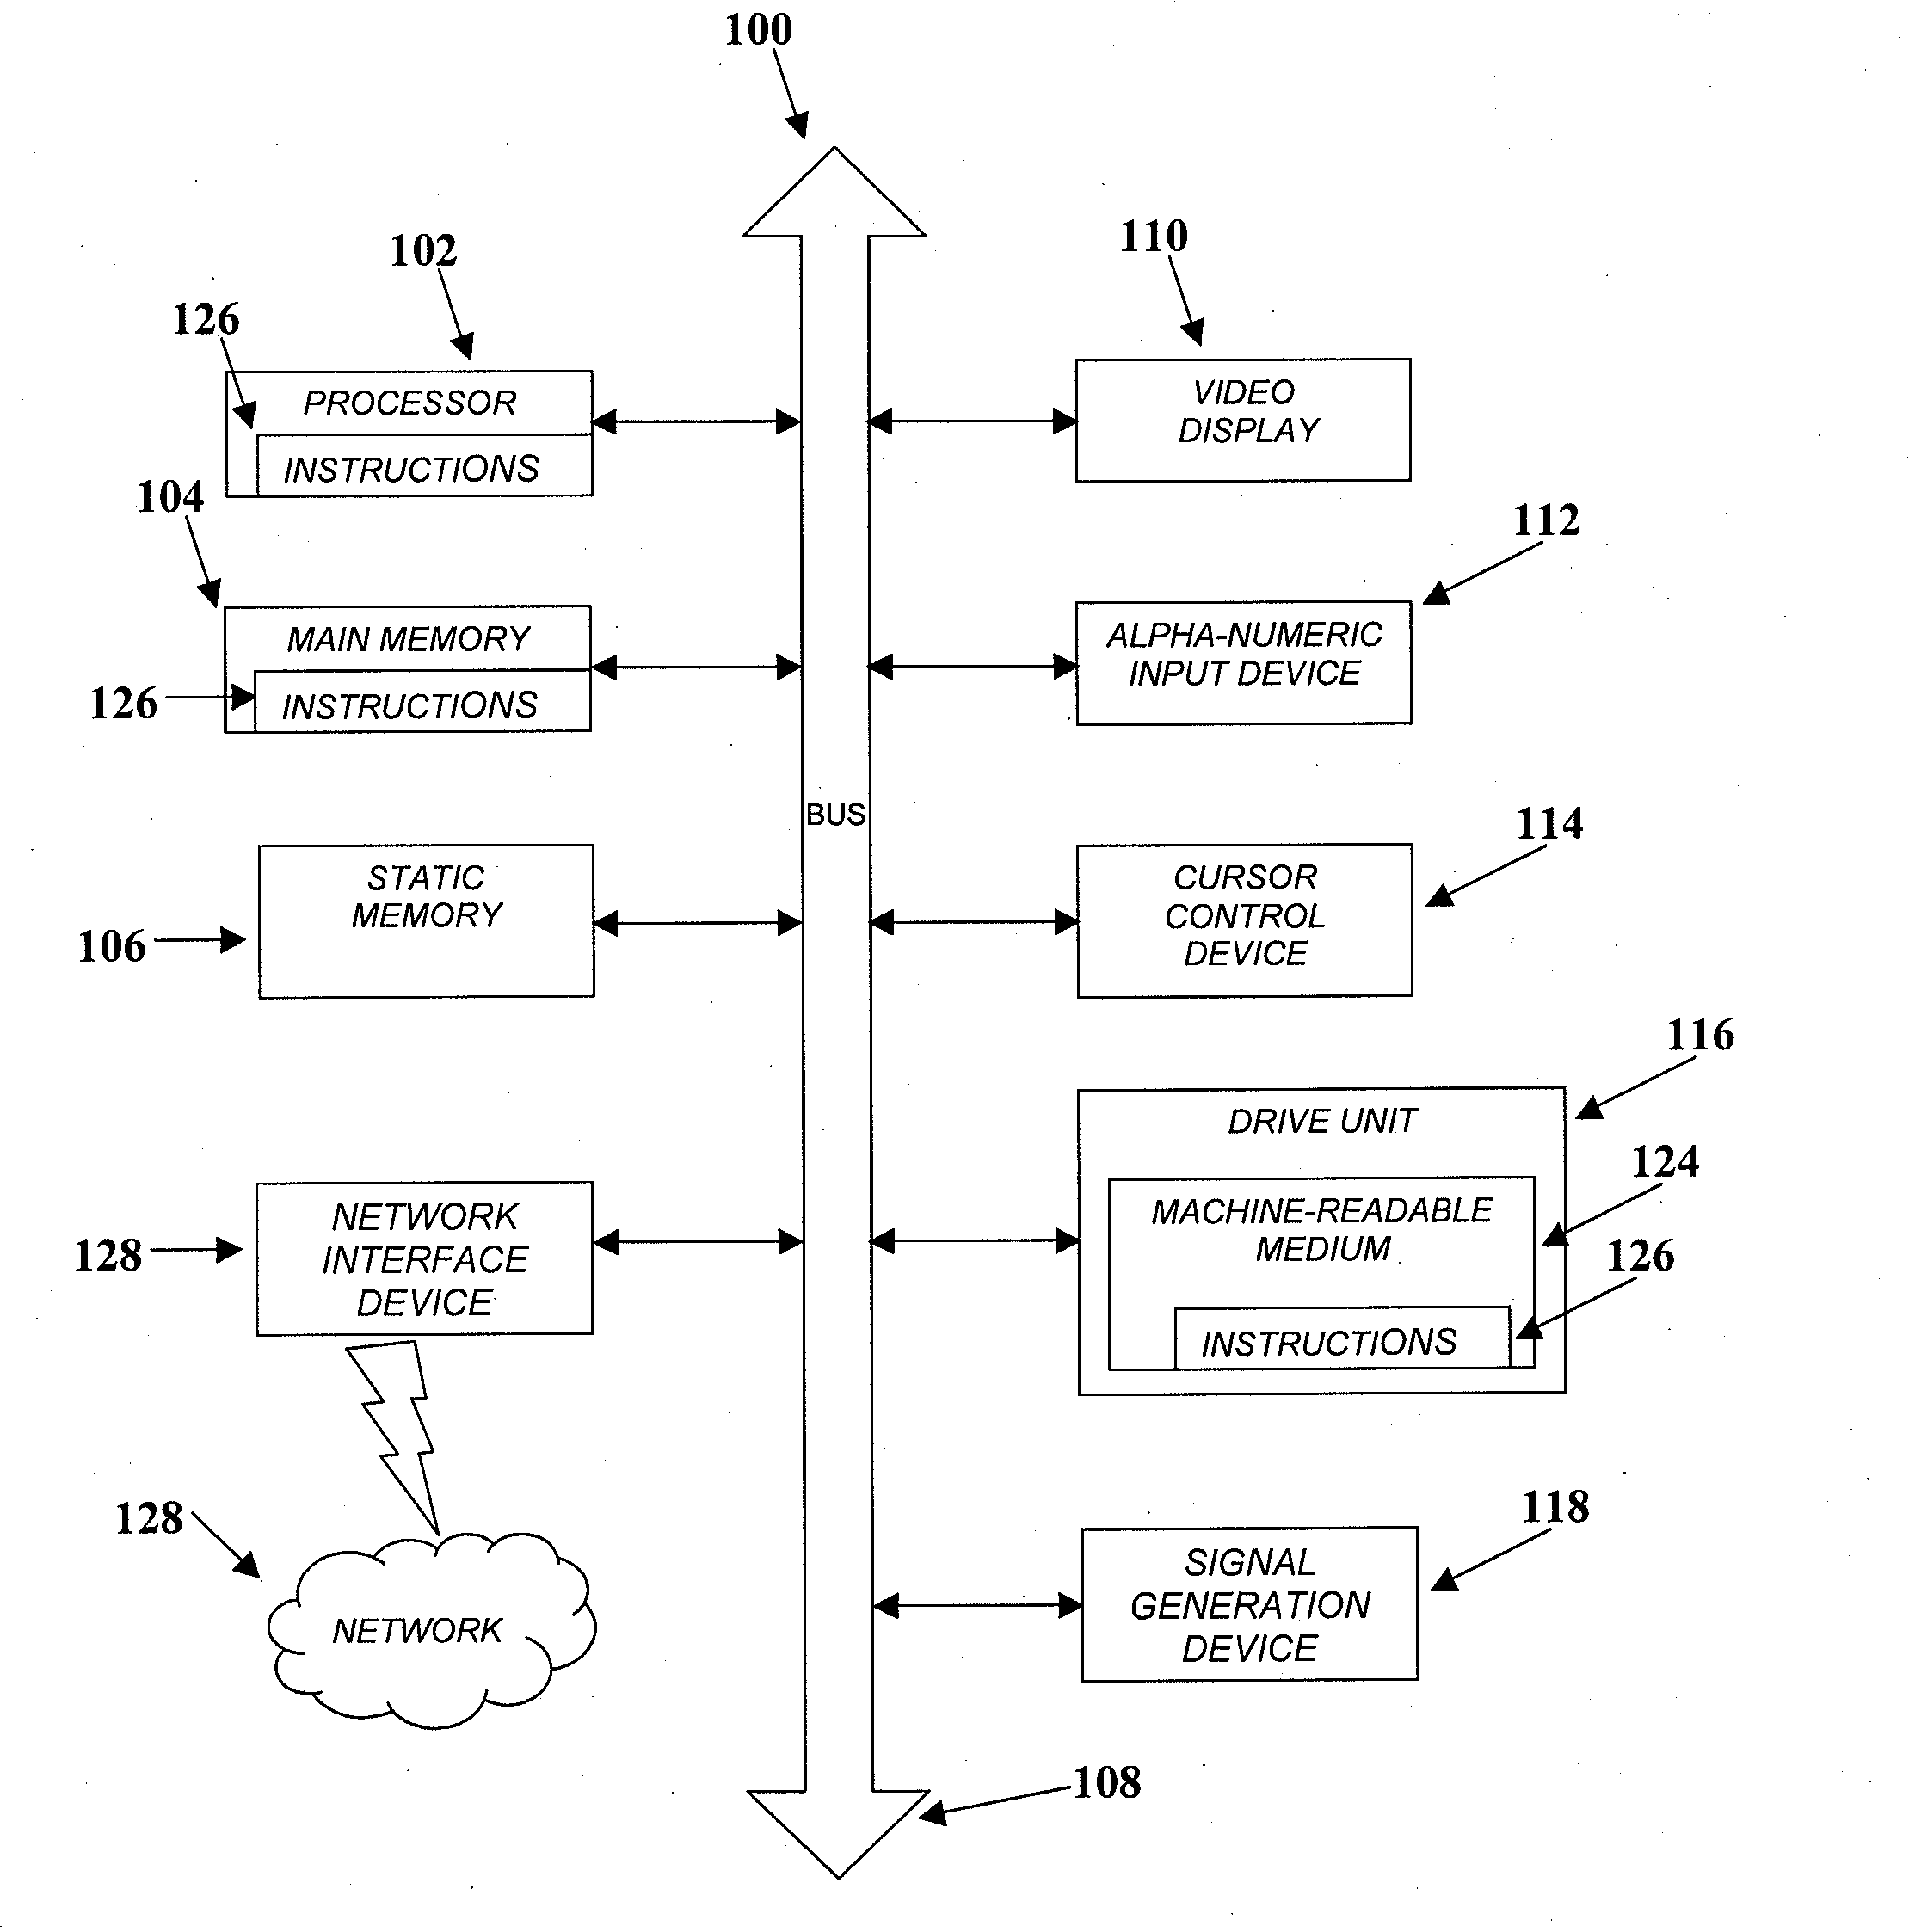 Method of network merchandising incorporating contextual and personalized advertising